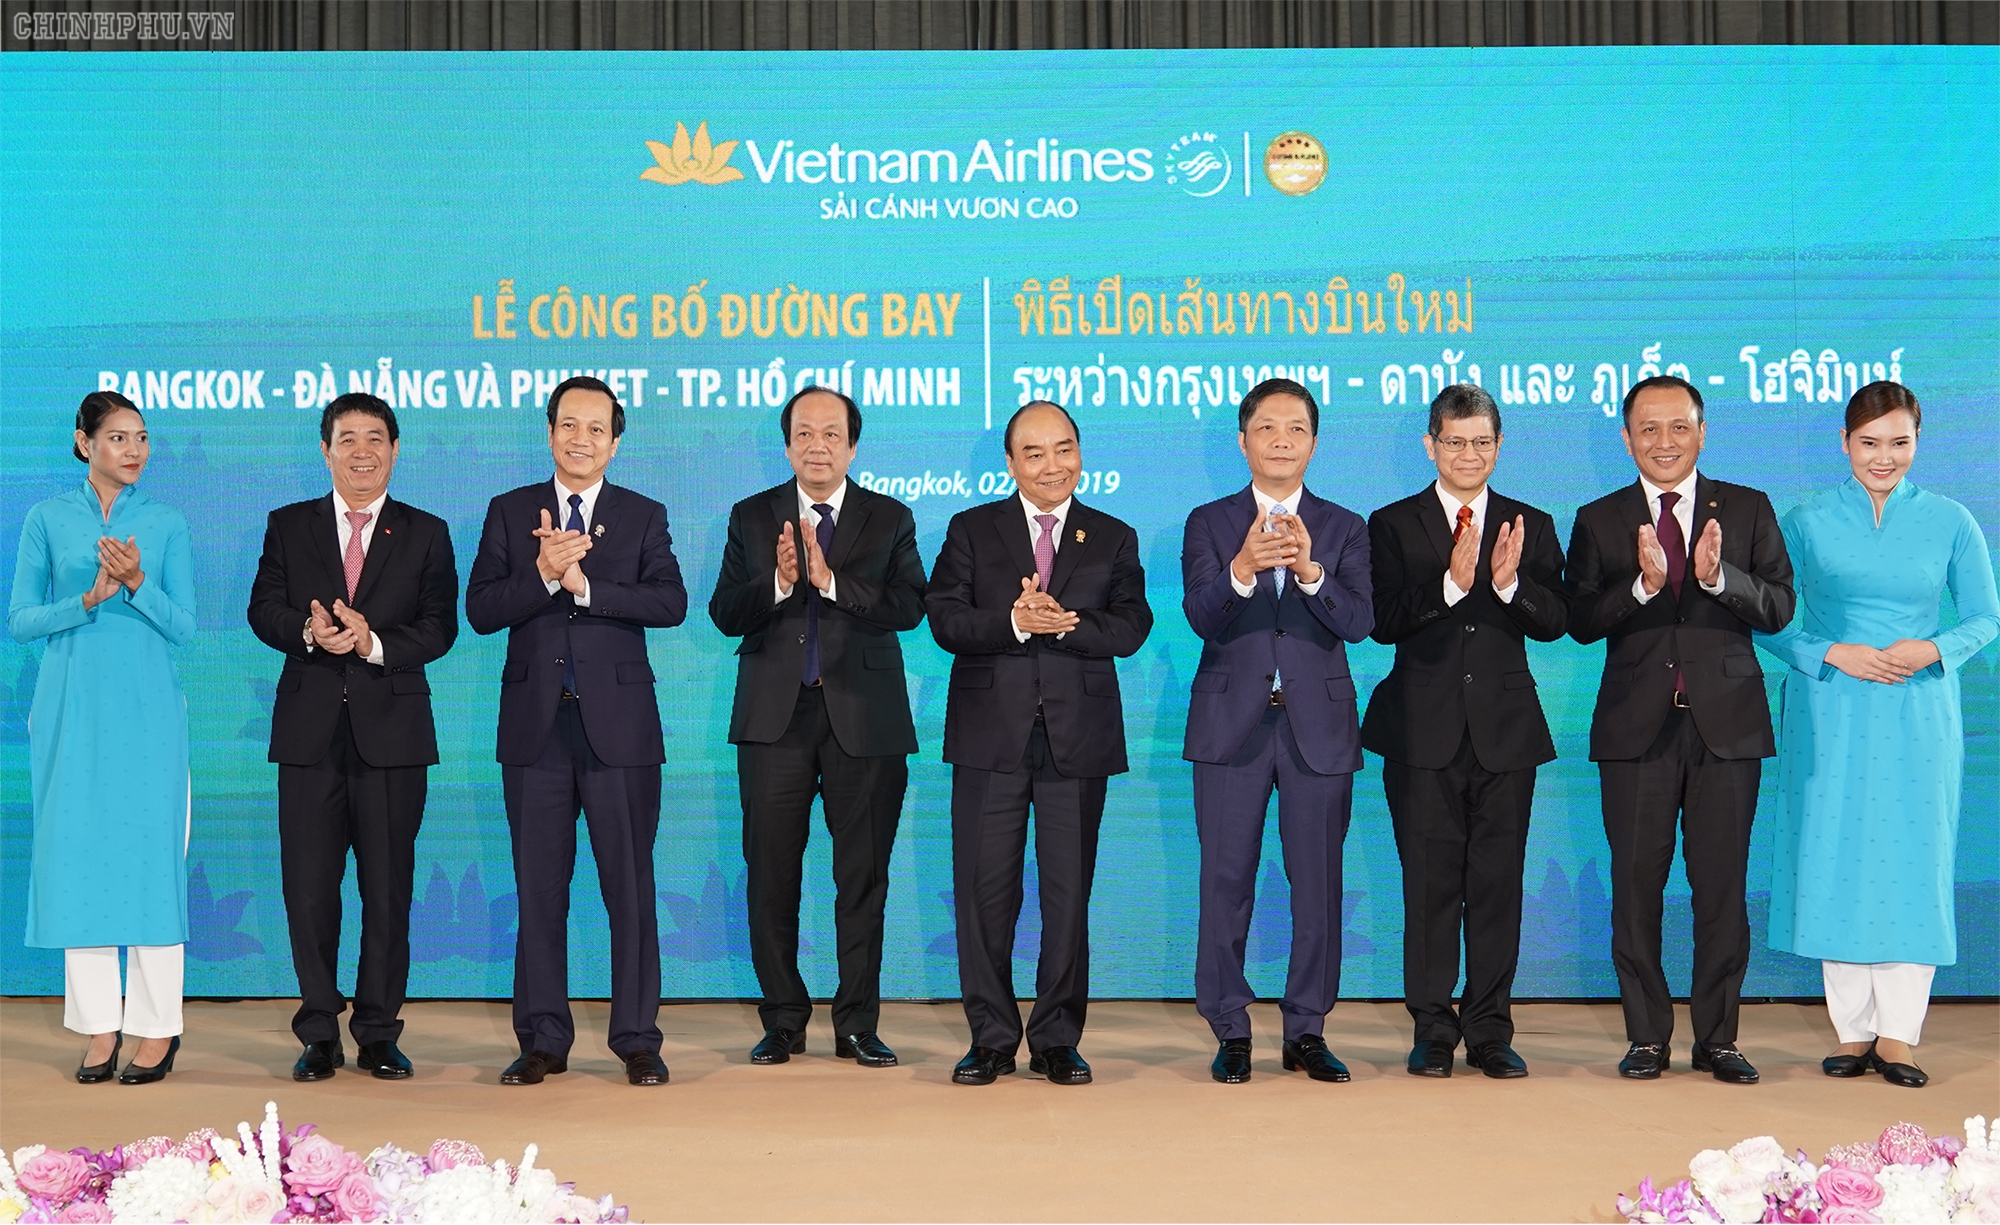 pm attends launching ceremonies for new air routes in bangkok